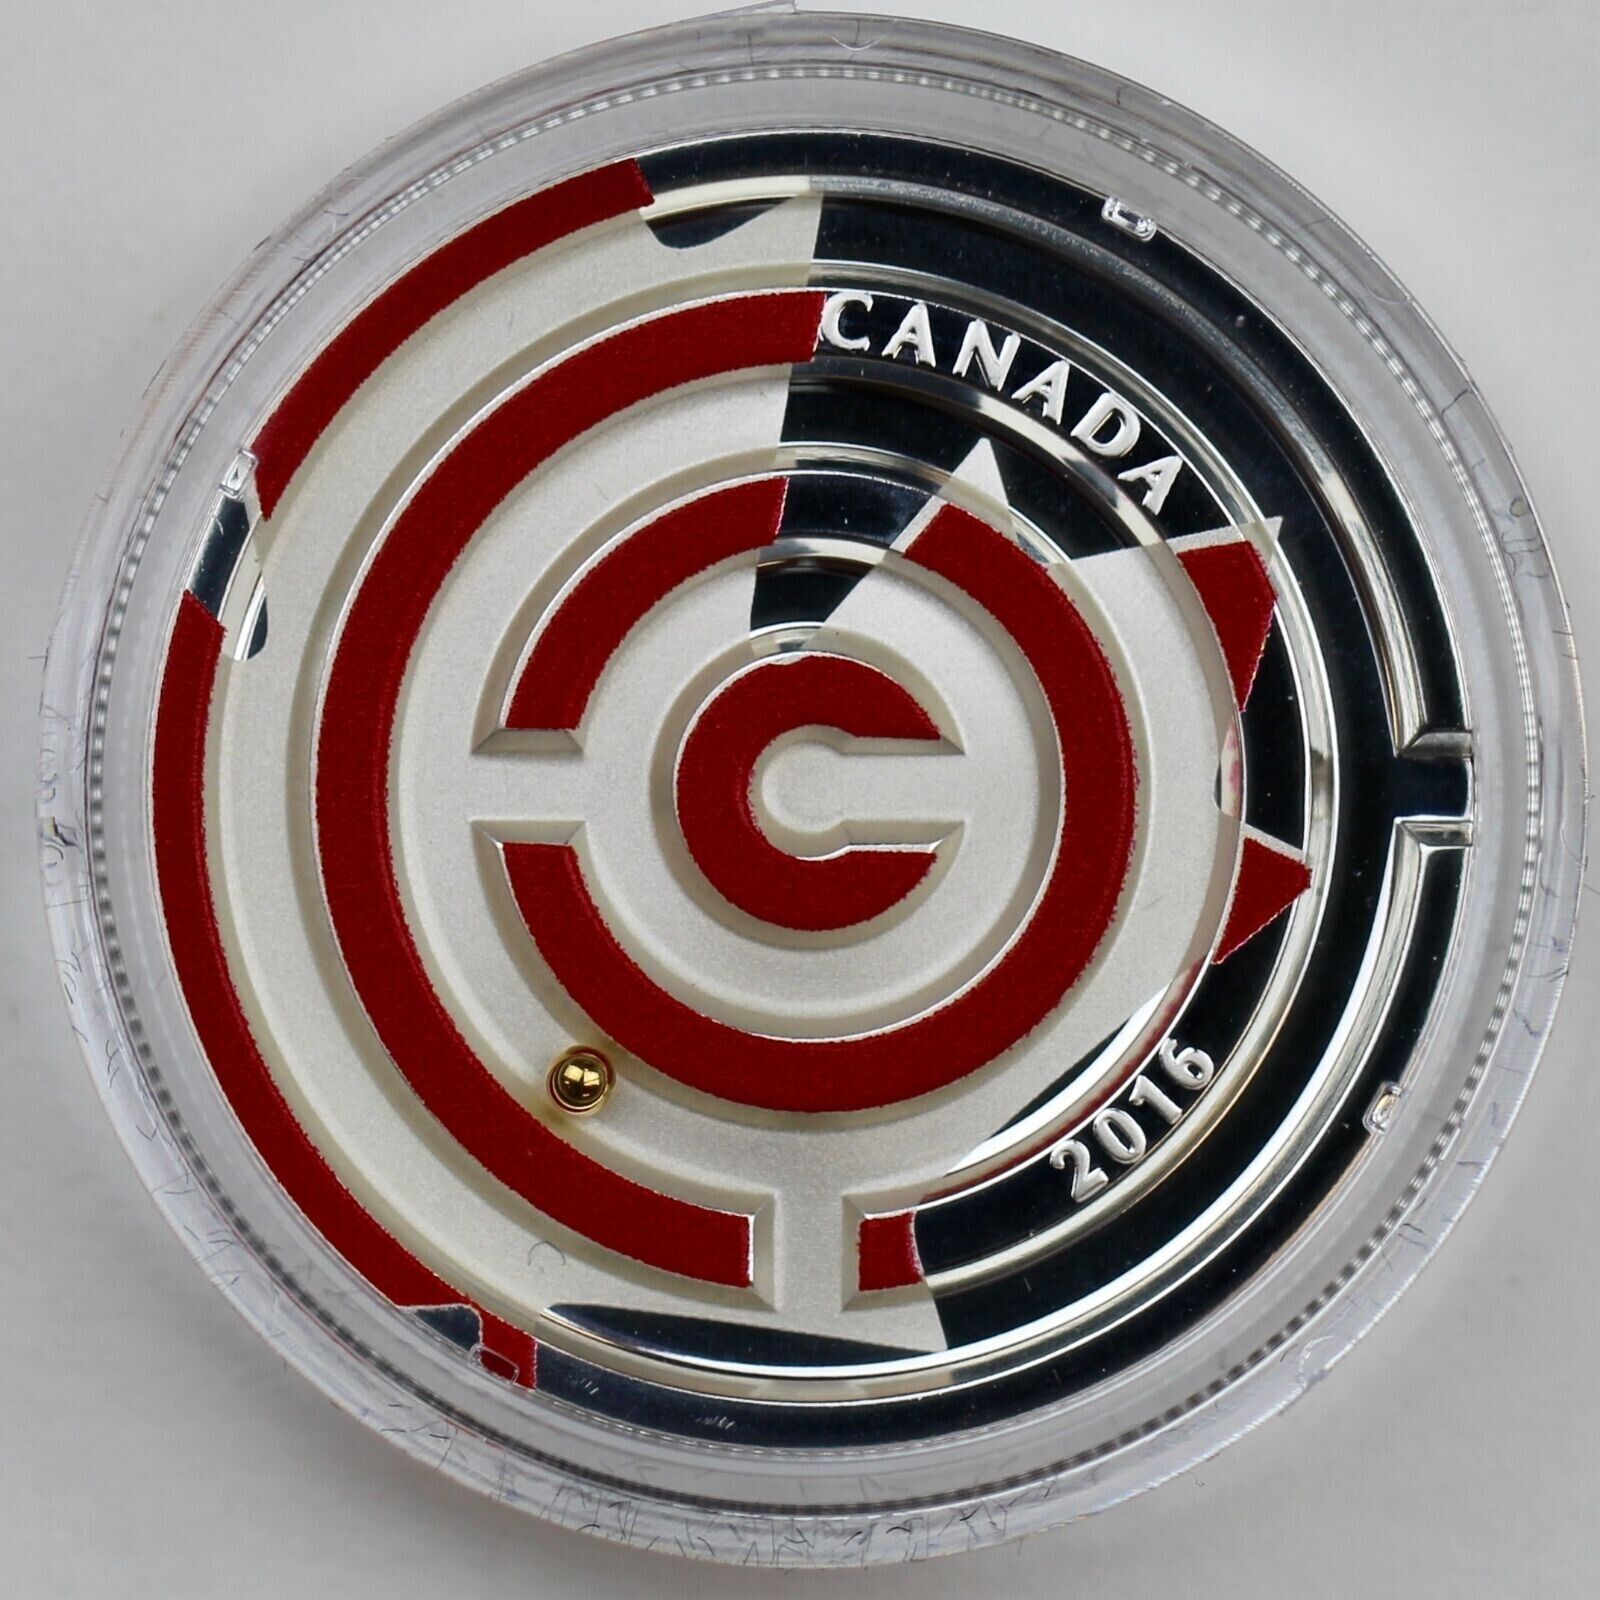 1 Oz Silver Coin 2016 $20 Canada Maple Leaf Maze Puzzle Red Maple Leaf Color-classypw.com-6